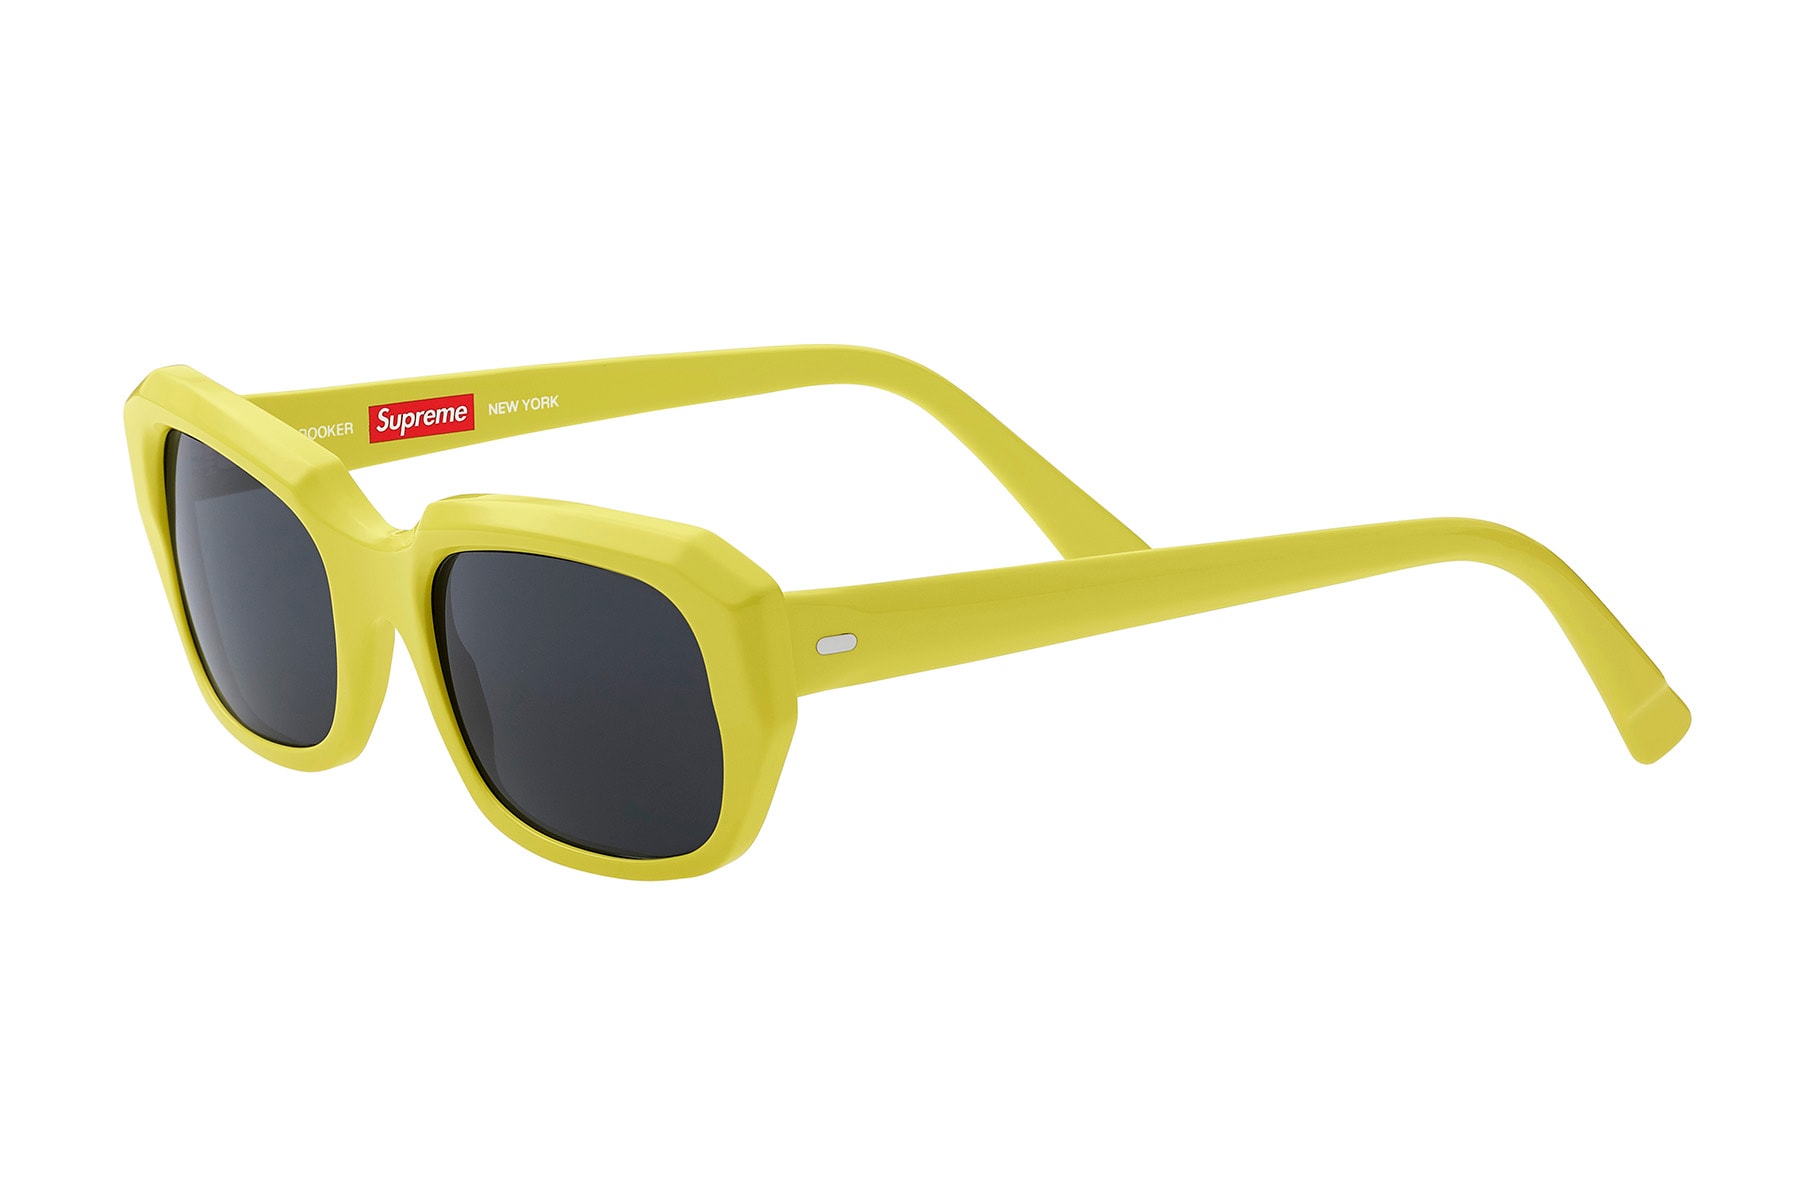 Supreme Spring Sunglasses Shades Drop Plaza Royale Exit Astro Booker Streetwear Street Style Rare